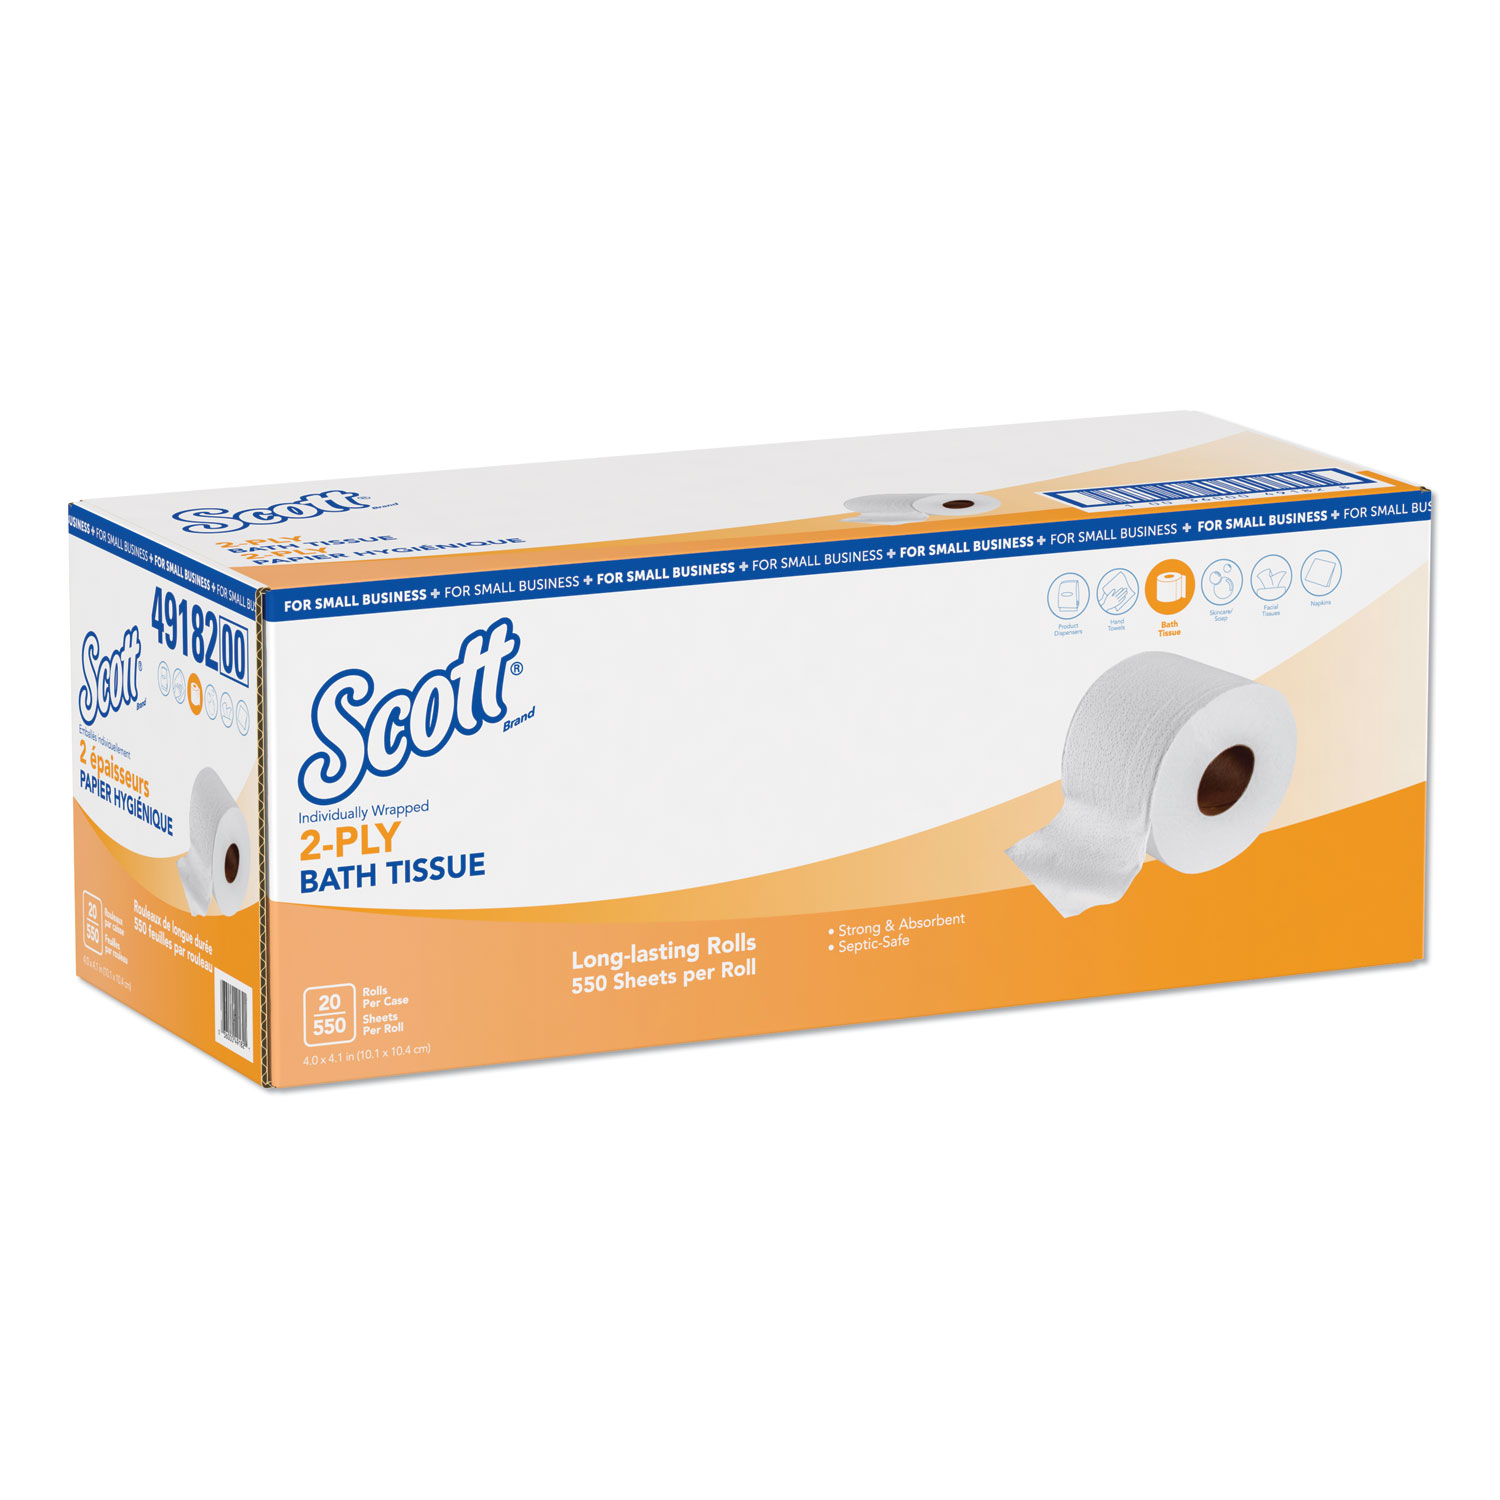  Scott 49182 Essential Standard Roll Bathroom Tissue, Small Business, Septic Safe, 2-Ply, White, 550 Sheets/Roll, 20 Rolls/Carton (KCC49182) 